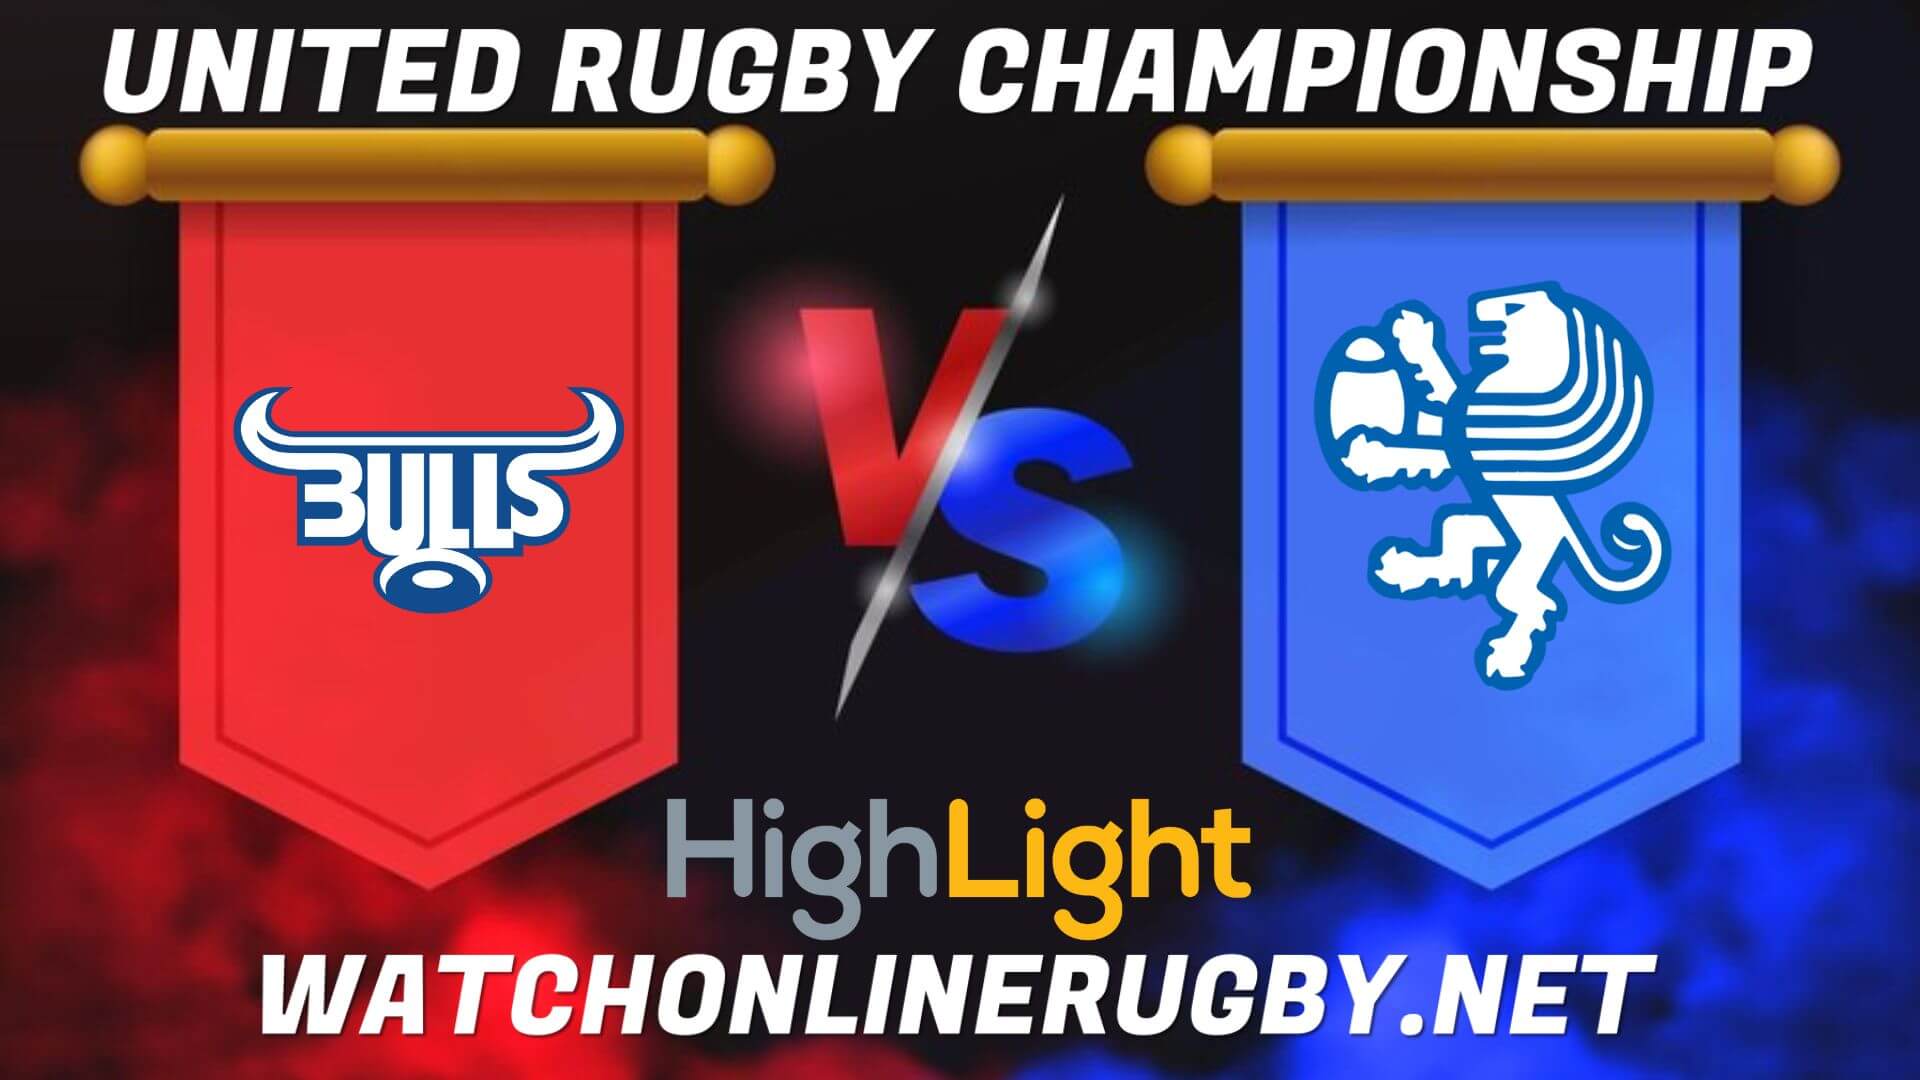 Bulls Vs Benetton Rugby United Rugby Championship 2022 RD 16